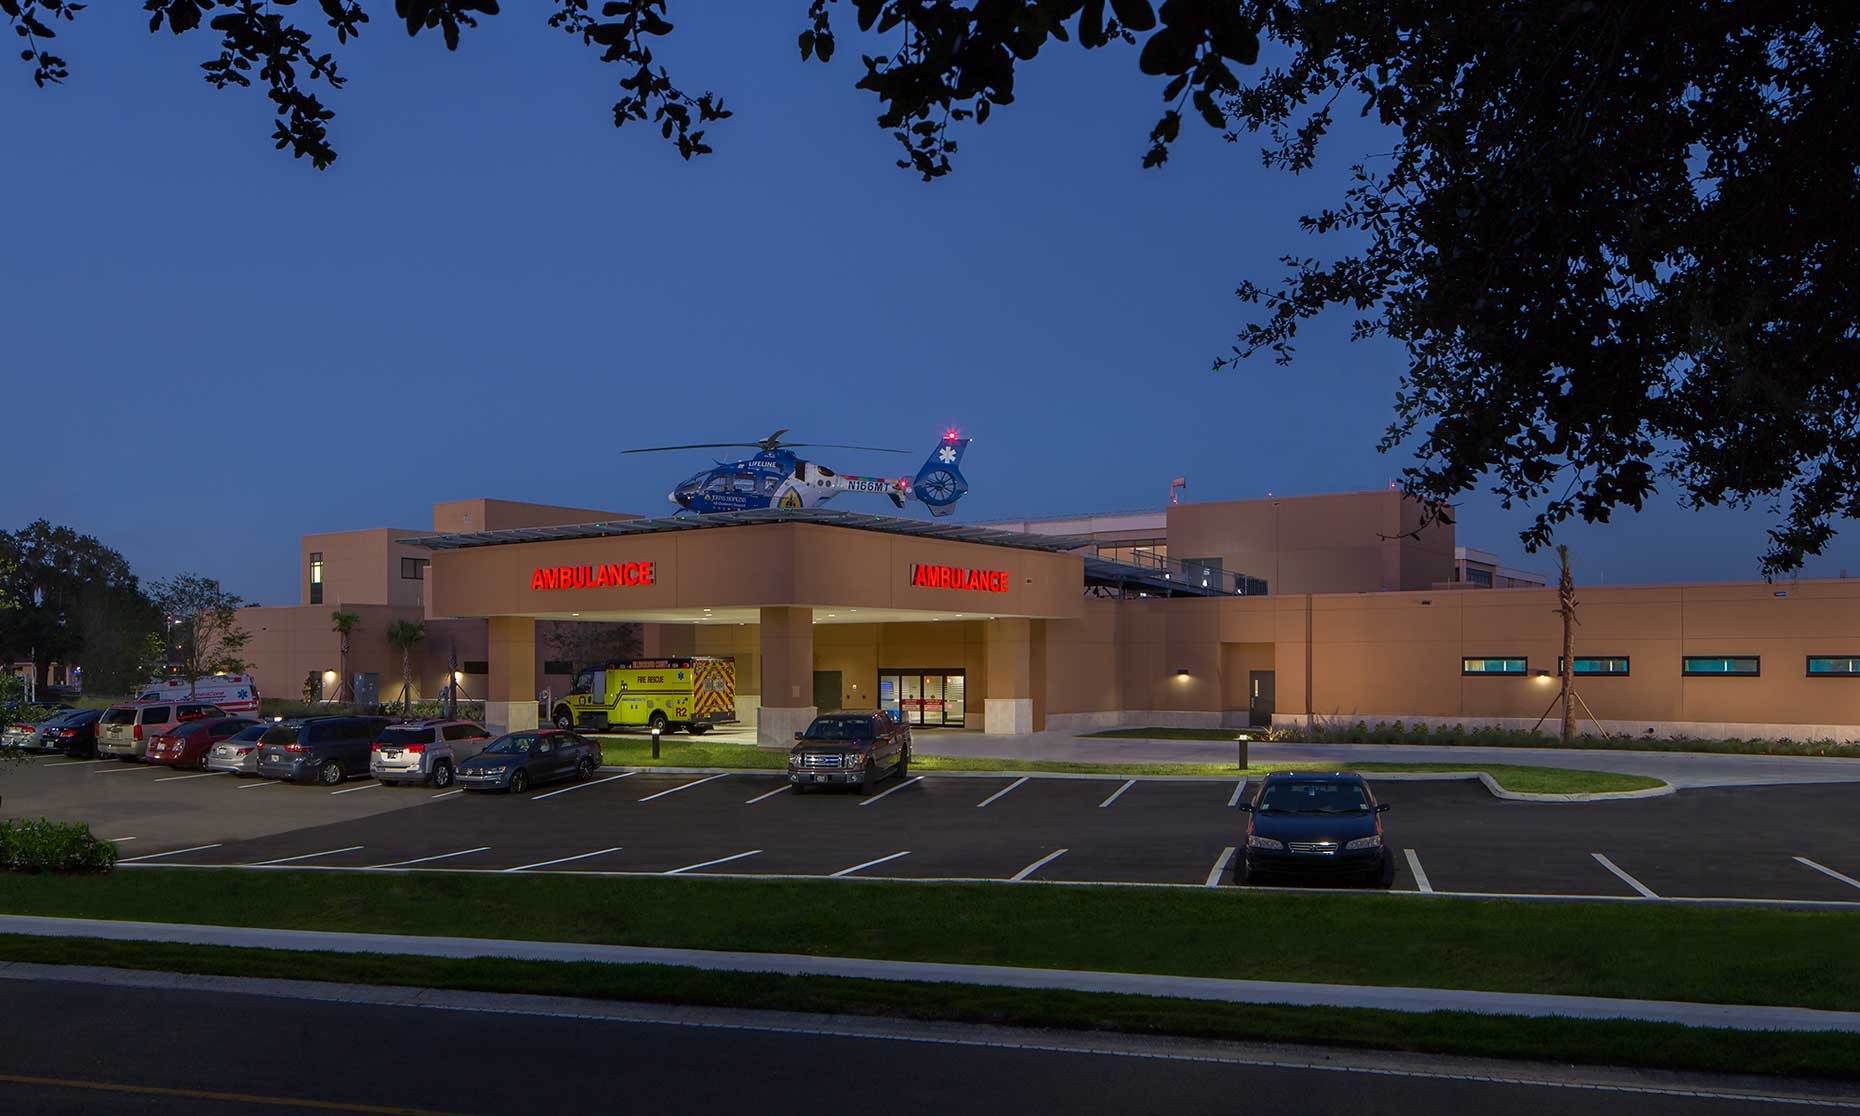 A photo of the ER entrance at twilight with an ambulance and helicopter landed on the roof of Brandon Regional Medical Center